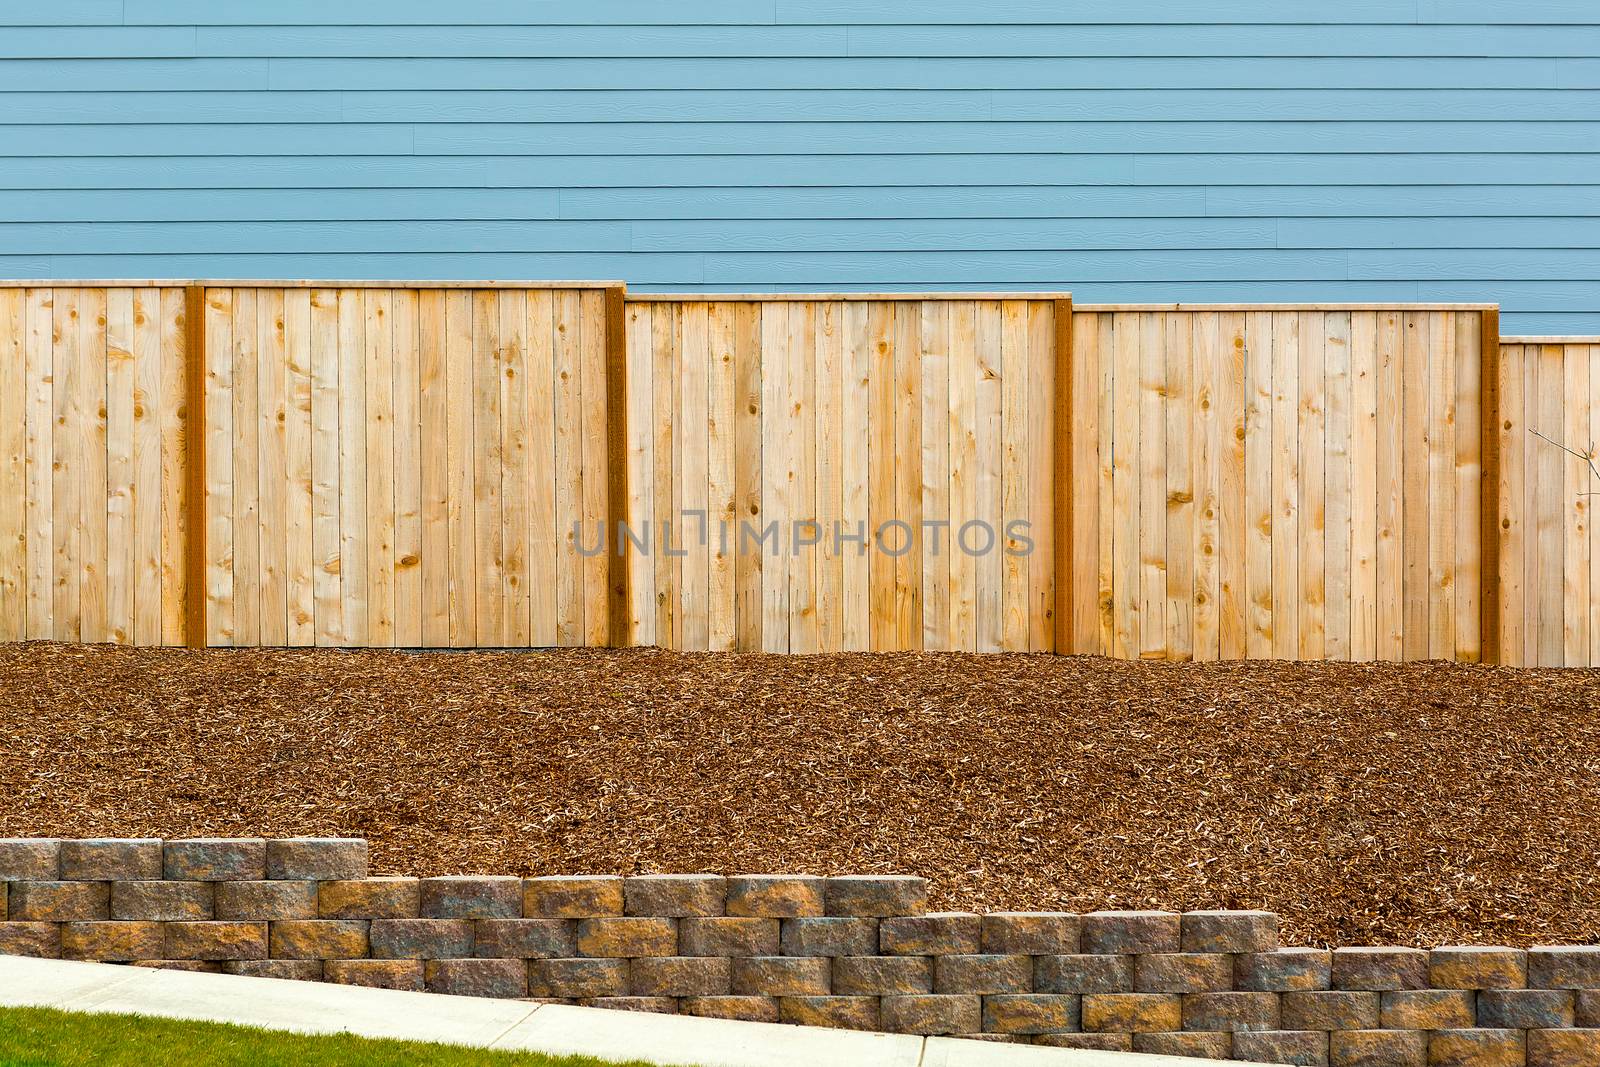 New Garden Wood Fence with house siding barkdust mulch concrete retaining wall along exterior sidewalk